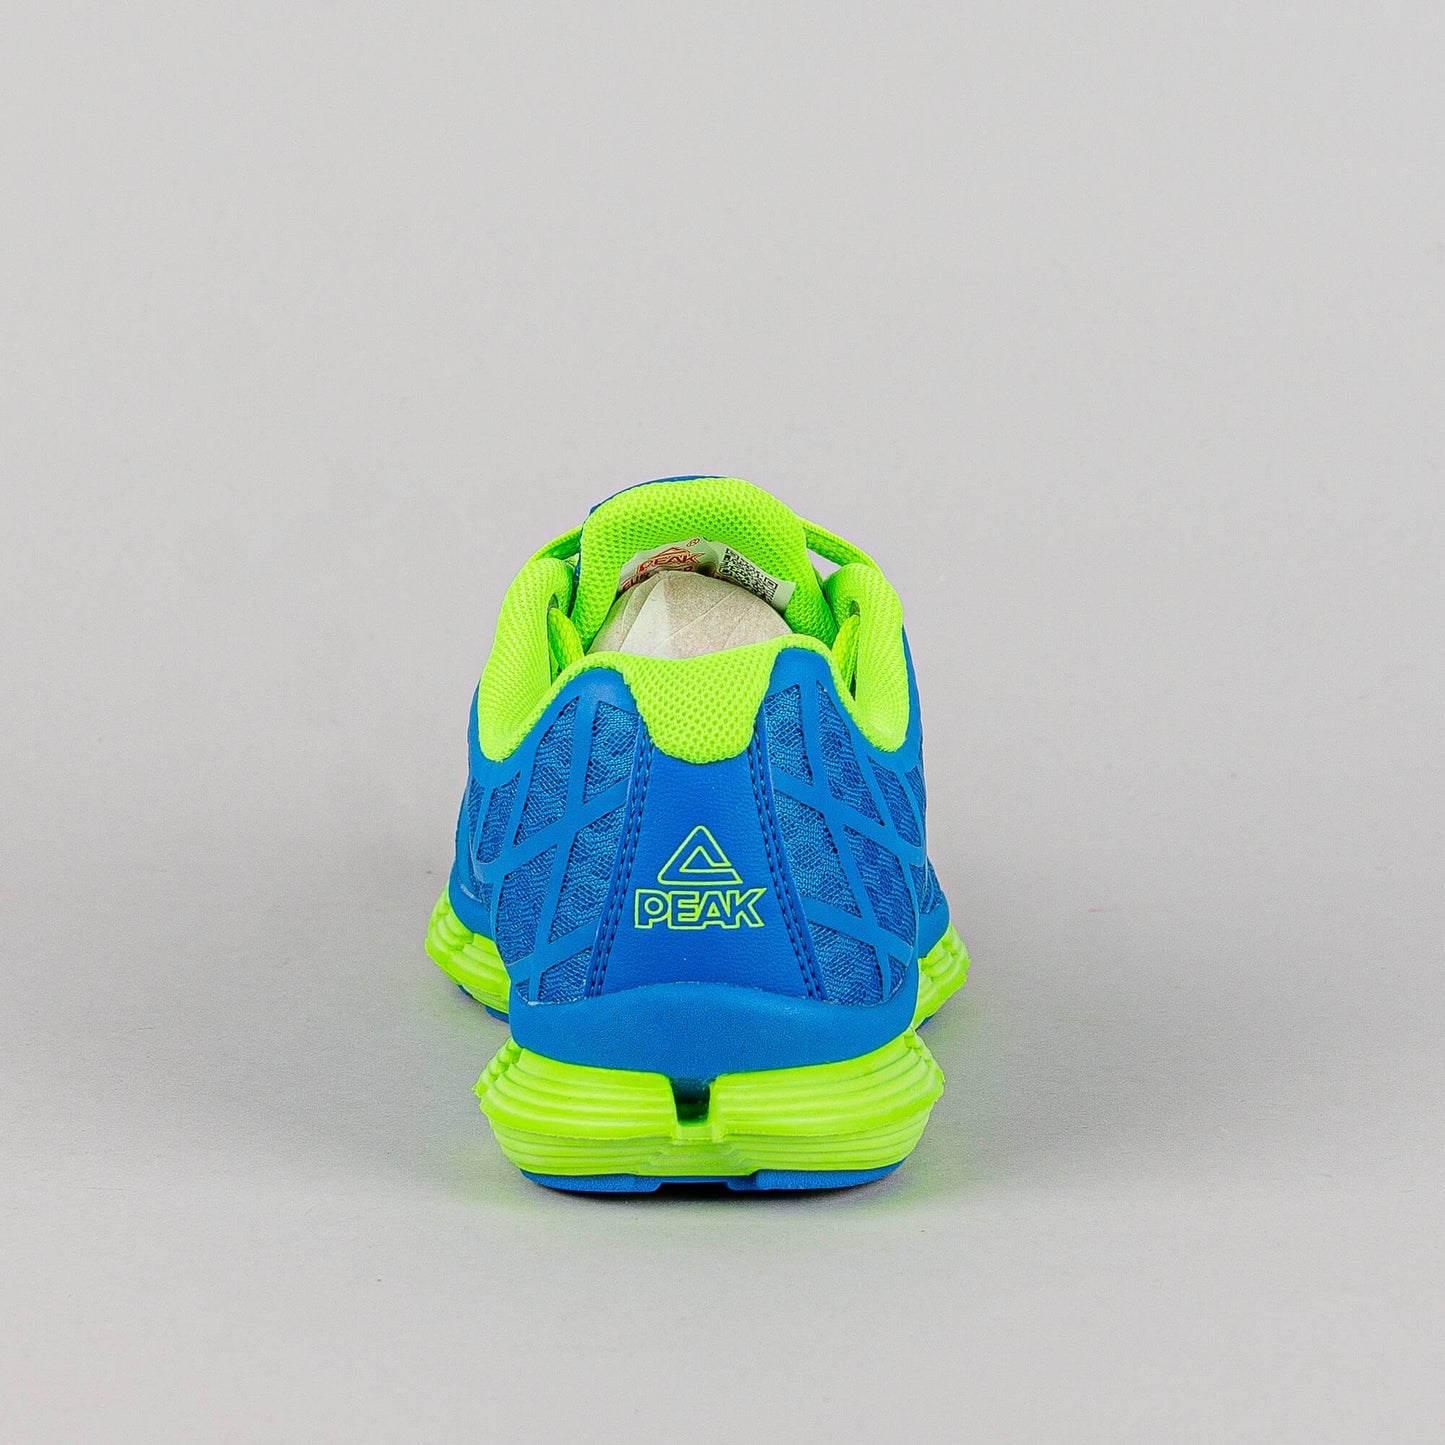 PEAK Running Shoes GT Protection Blue/Fluorescense Yellow